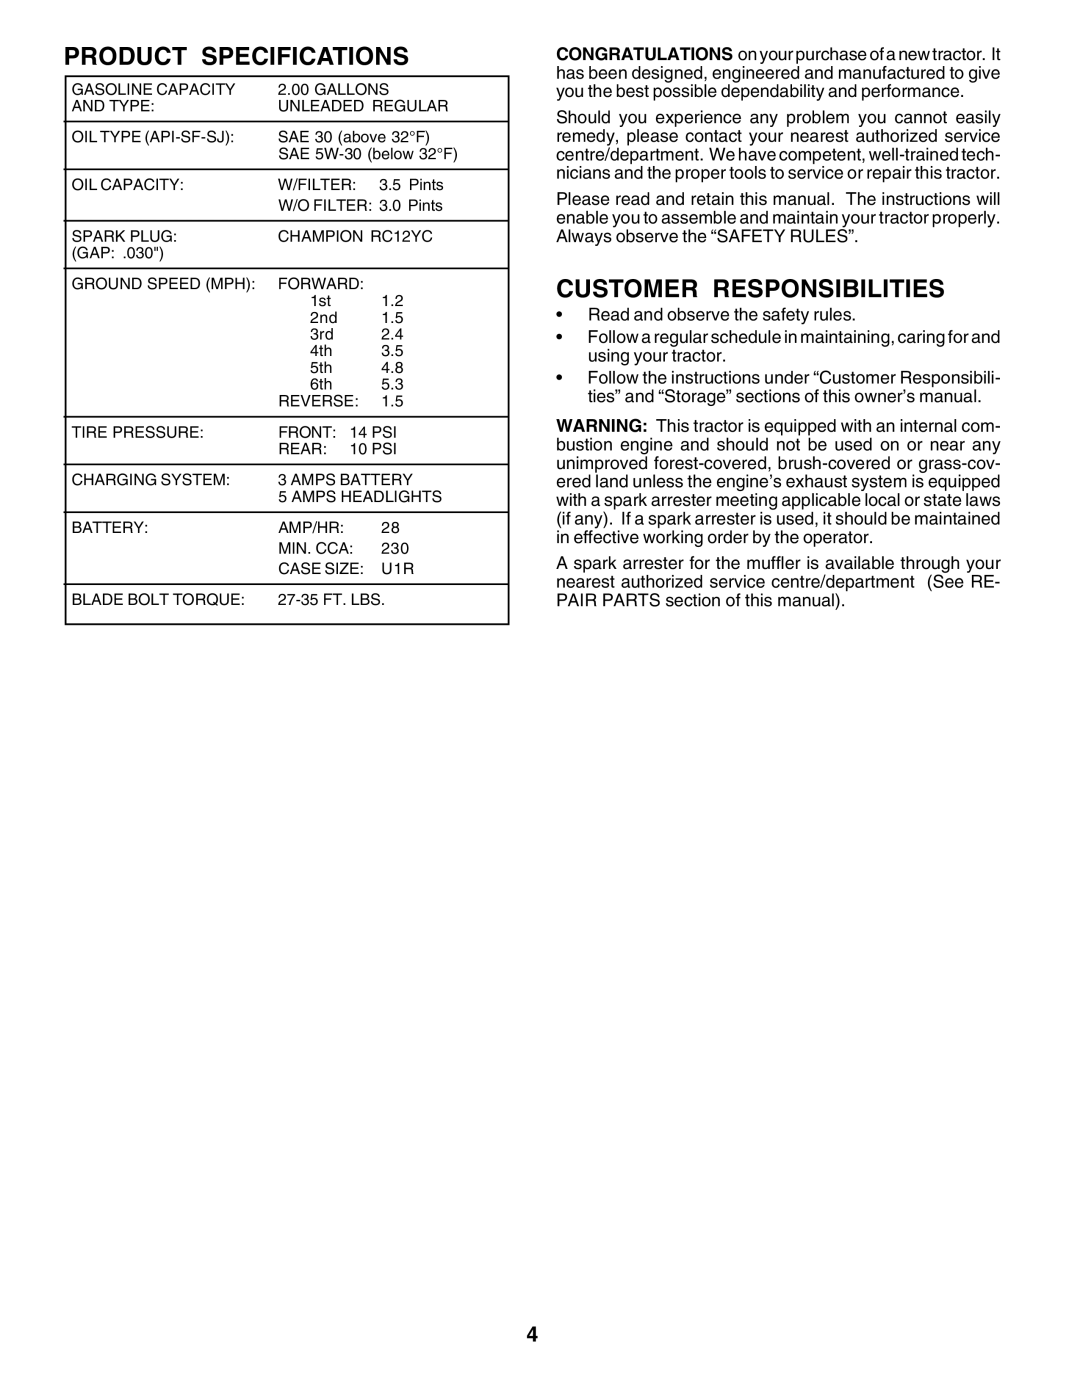 Poulan 183046 owner manual Product Specifications, Customer Responsibilities 